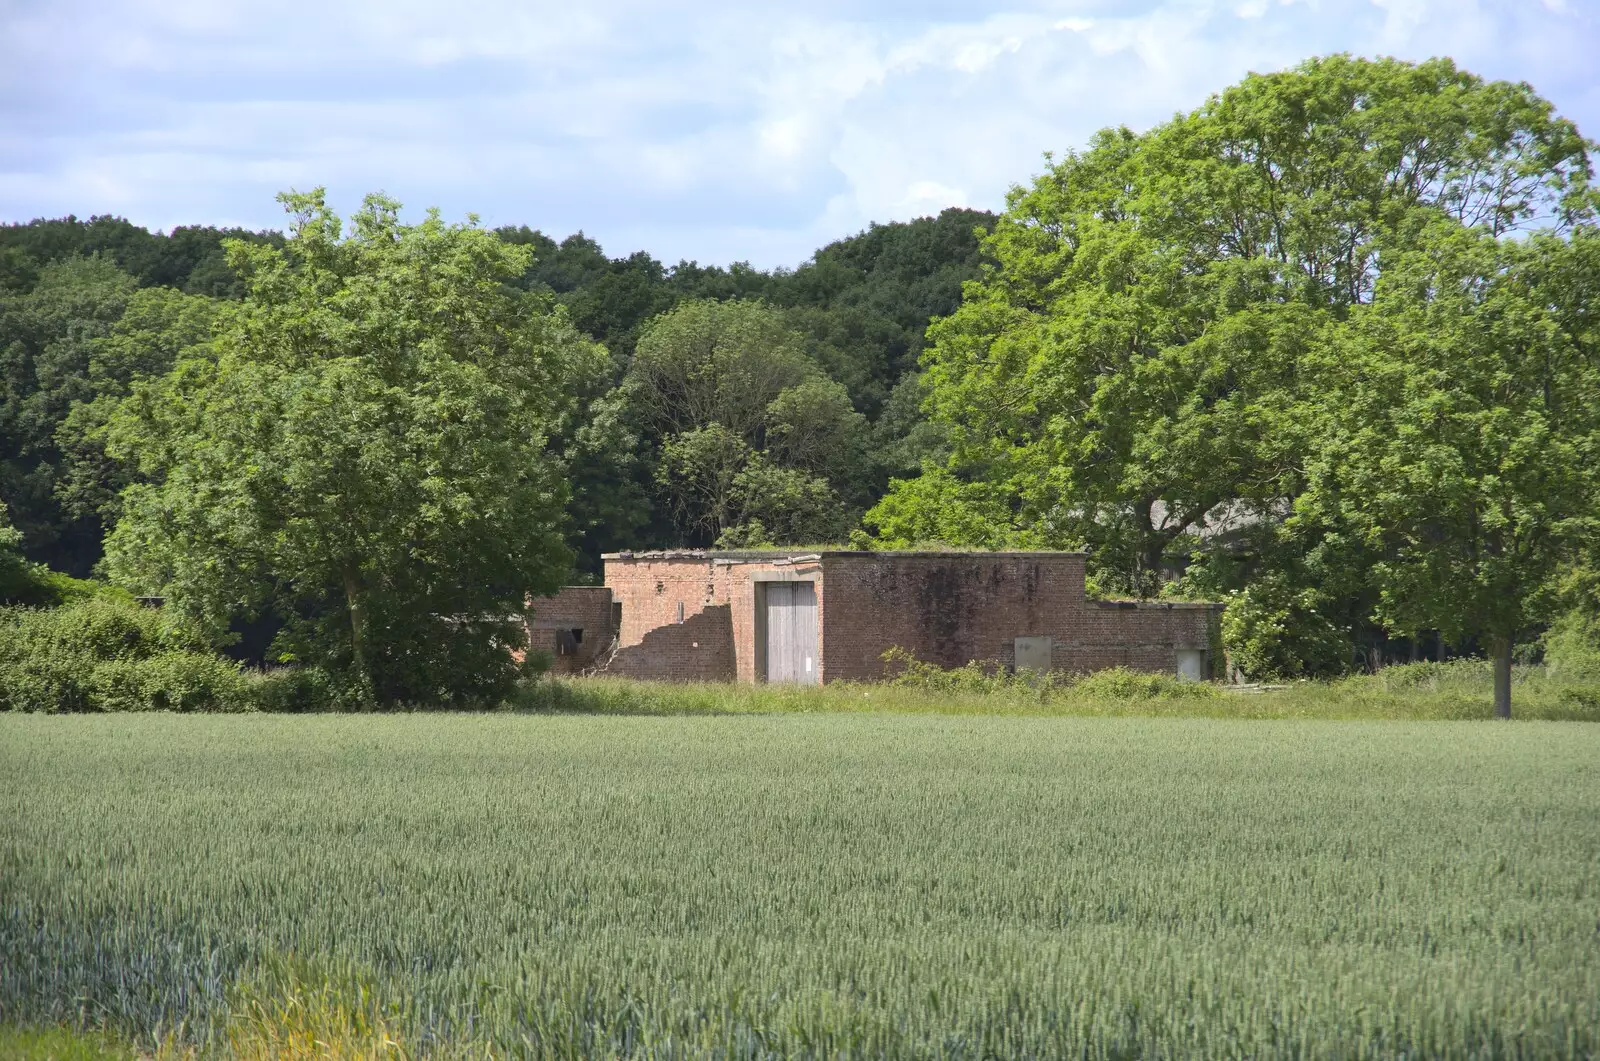 The last remaining building on the old airfield, from A 1940s Timewarp, Site 4, Bungay Airfield, Flixton, Suffolk - 9th June 2022